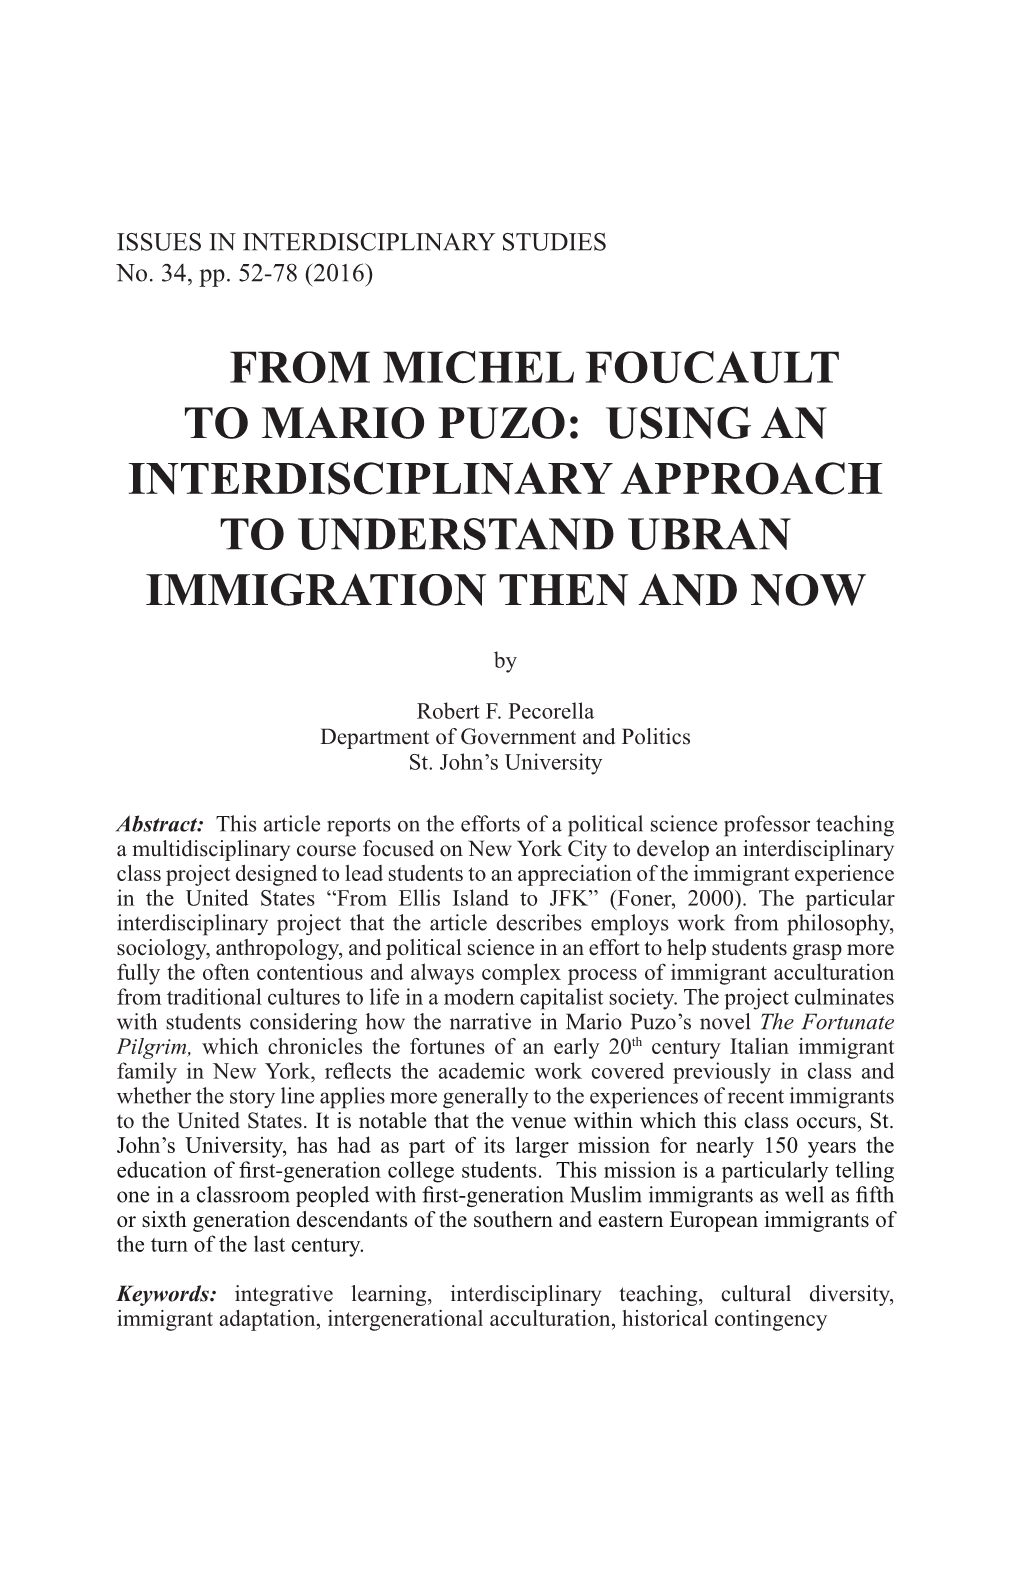 From Michel Foucault to Mario Puzo: Using an Interdisciplinary Approach to Understand Ubran Immigration Then and Now